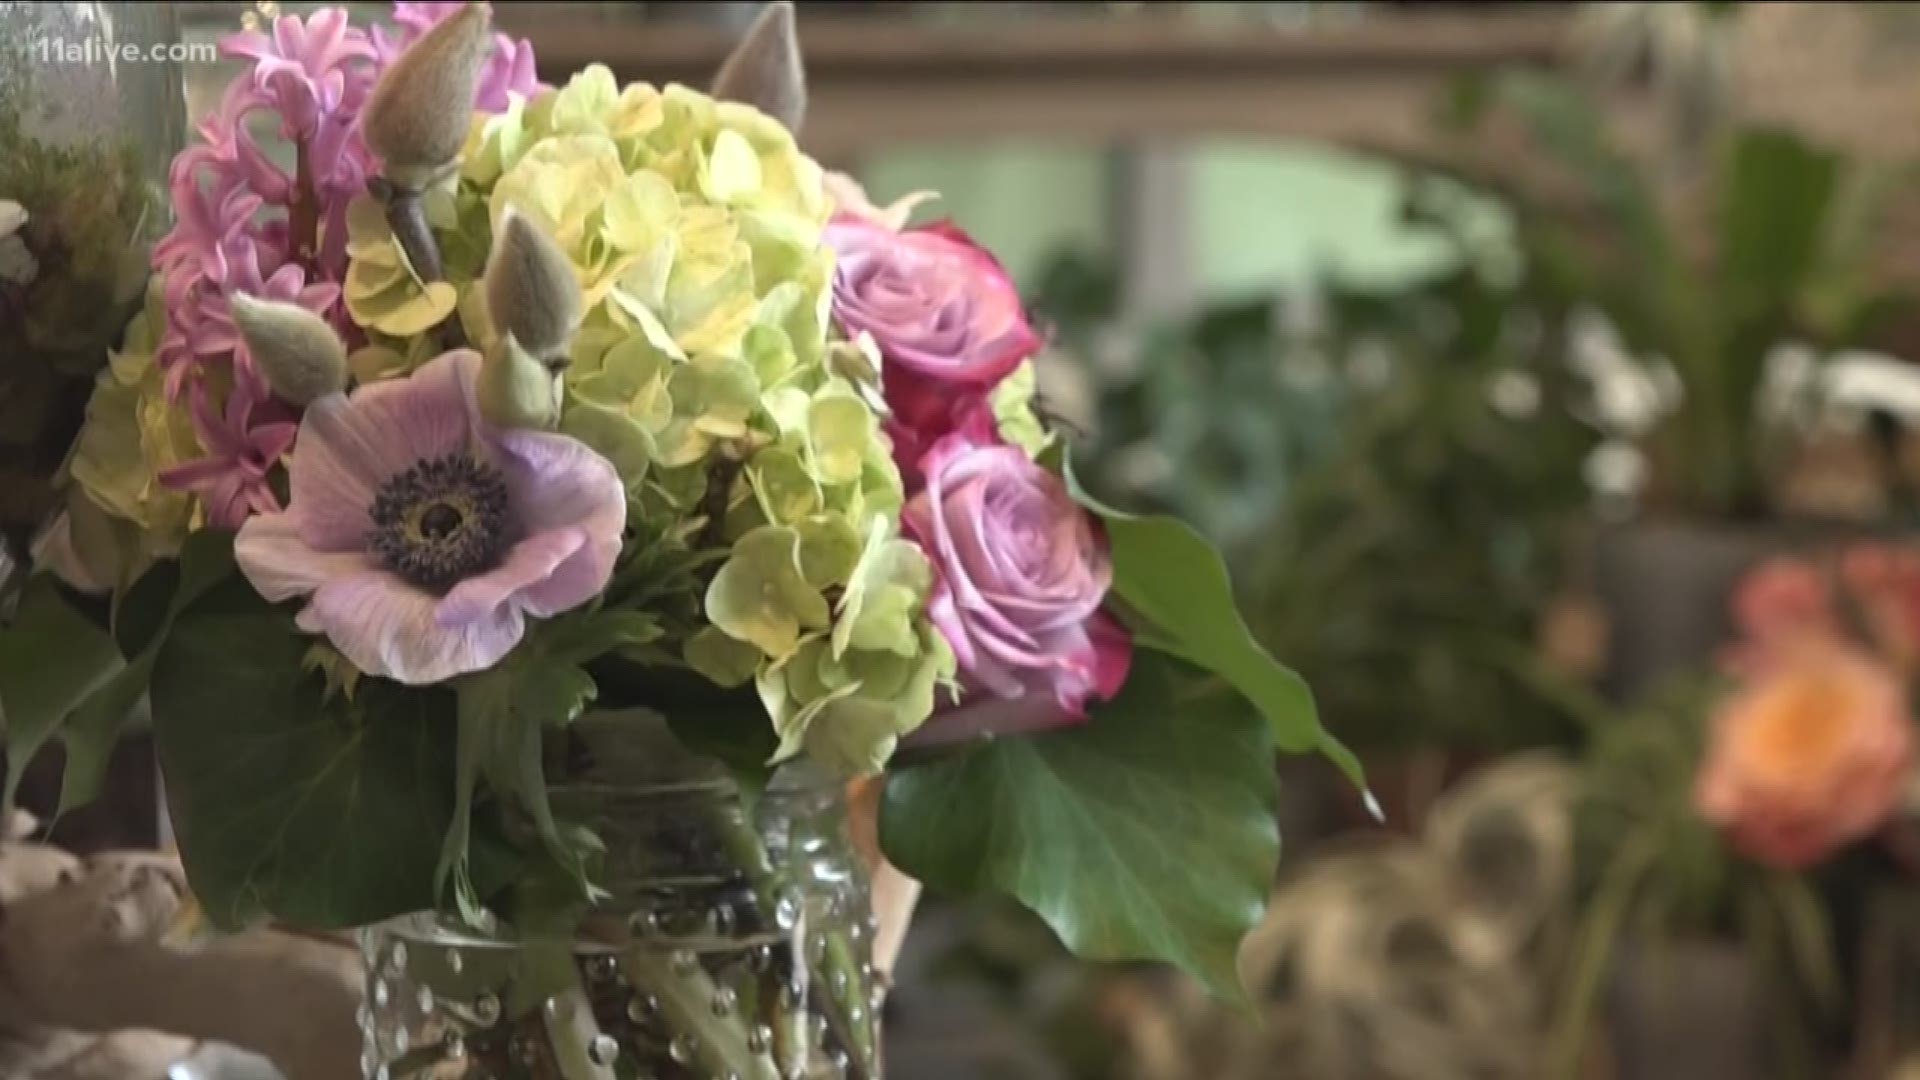 Flowers and beautiful and some smell good but can they improve your mood? 11Alive's Verify team went looking for the answer.